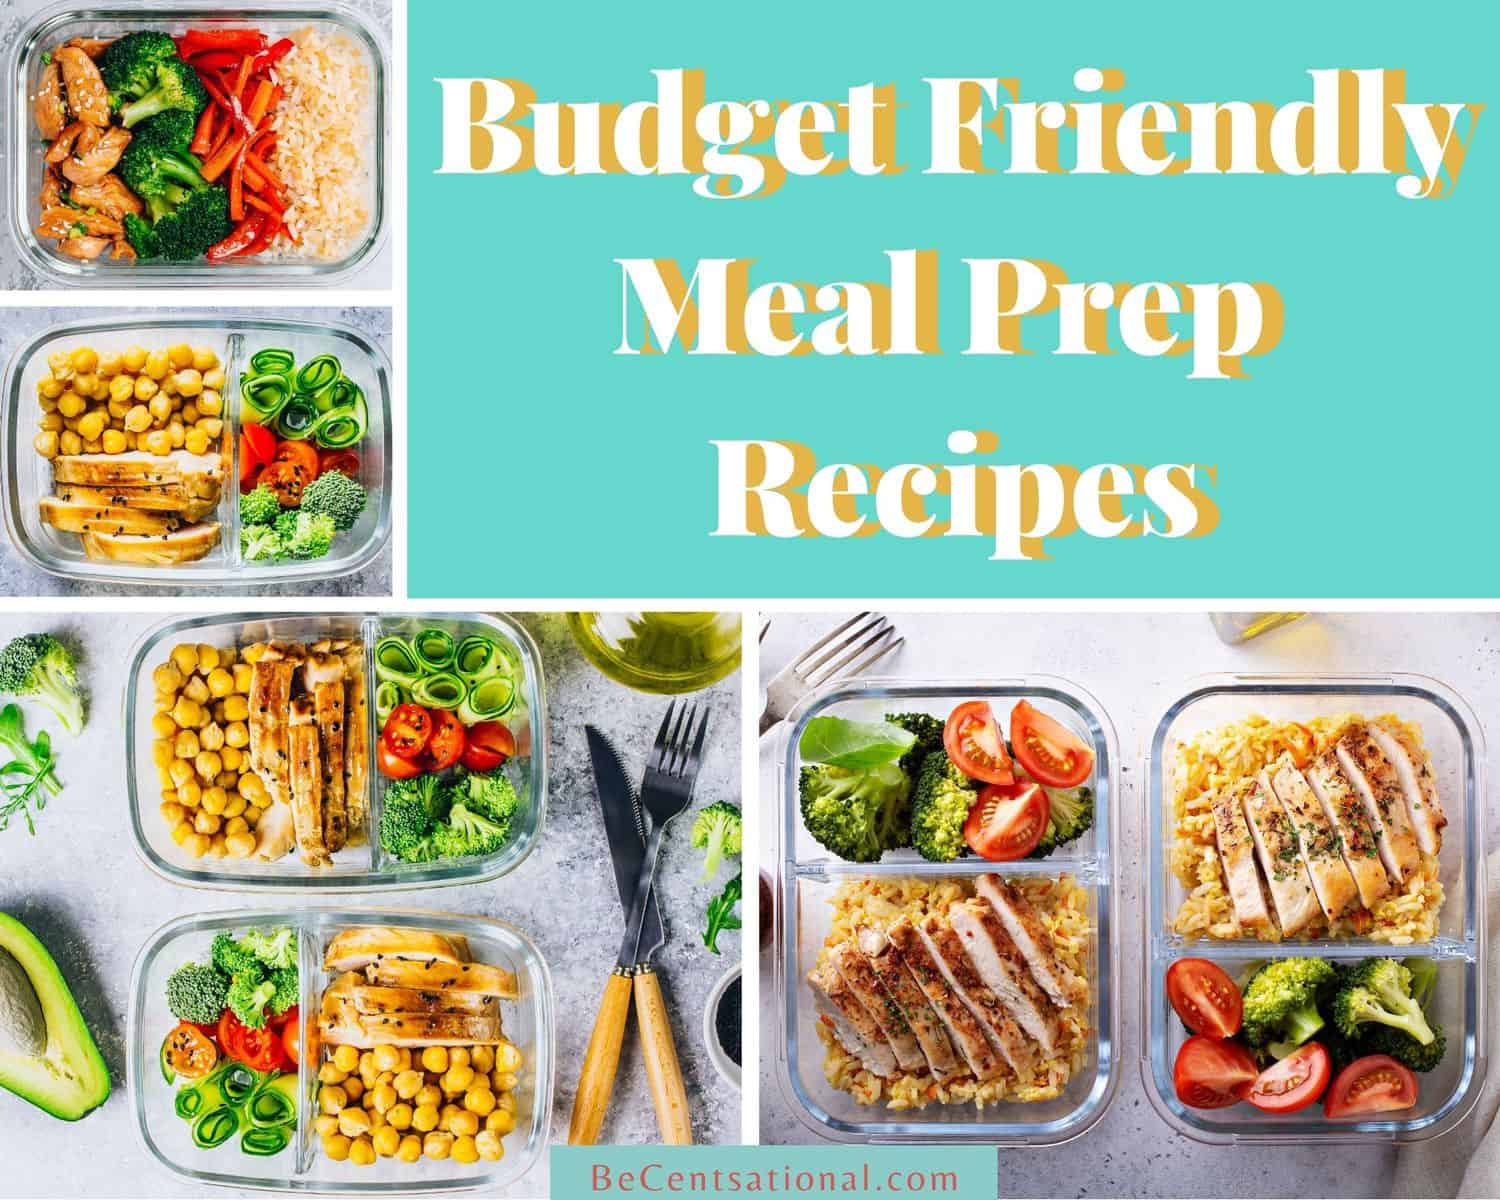 Budget-friendly meal assortments